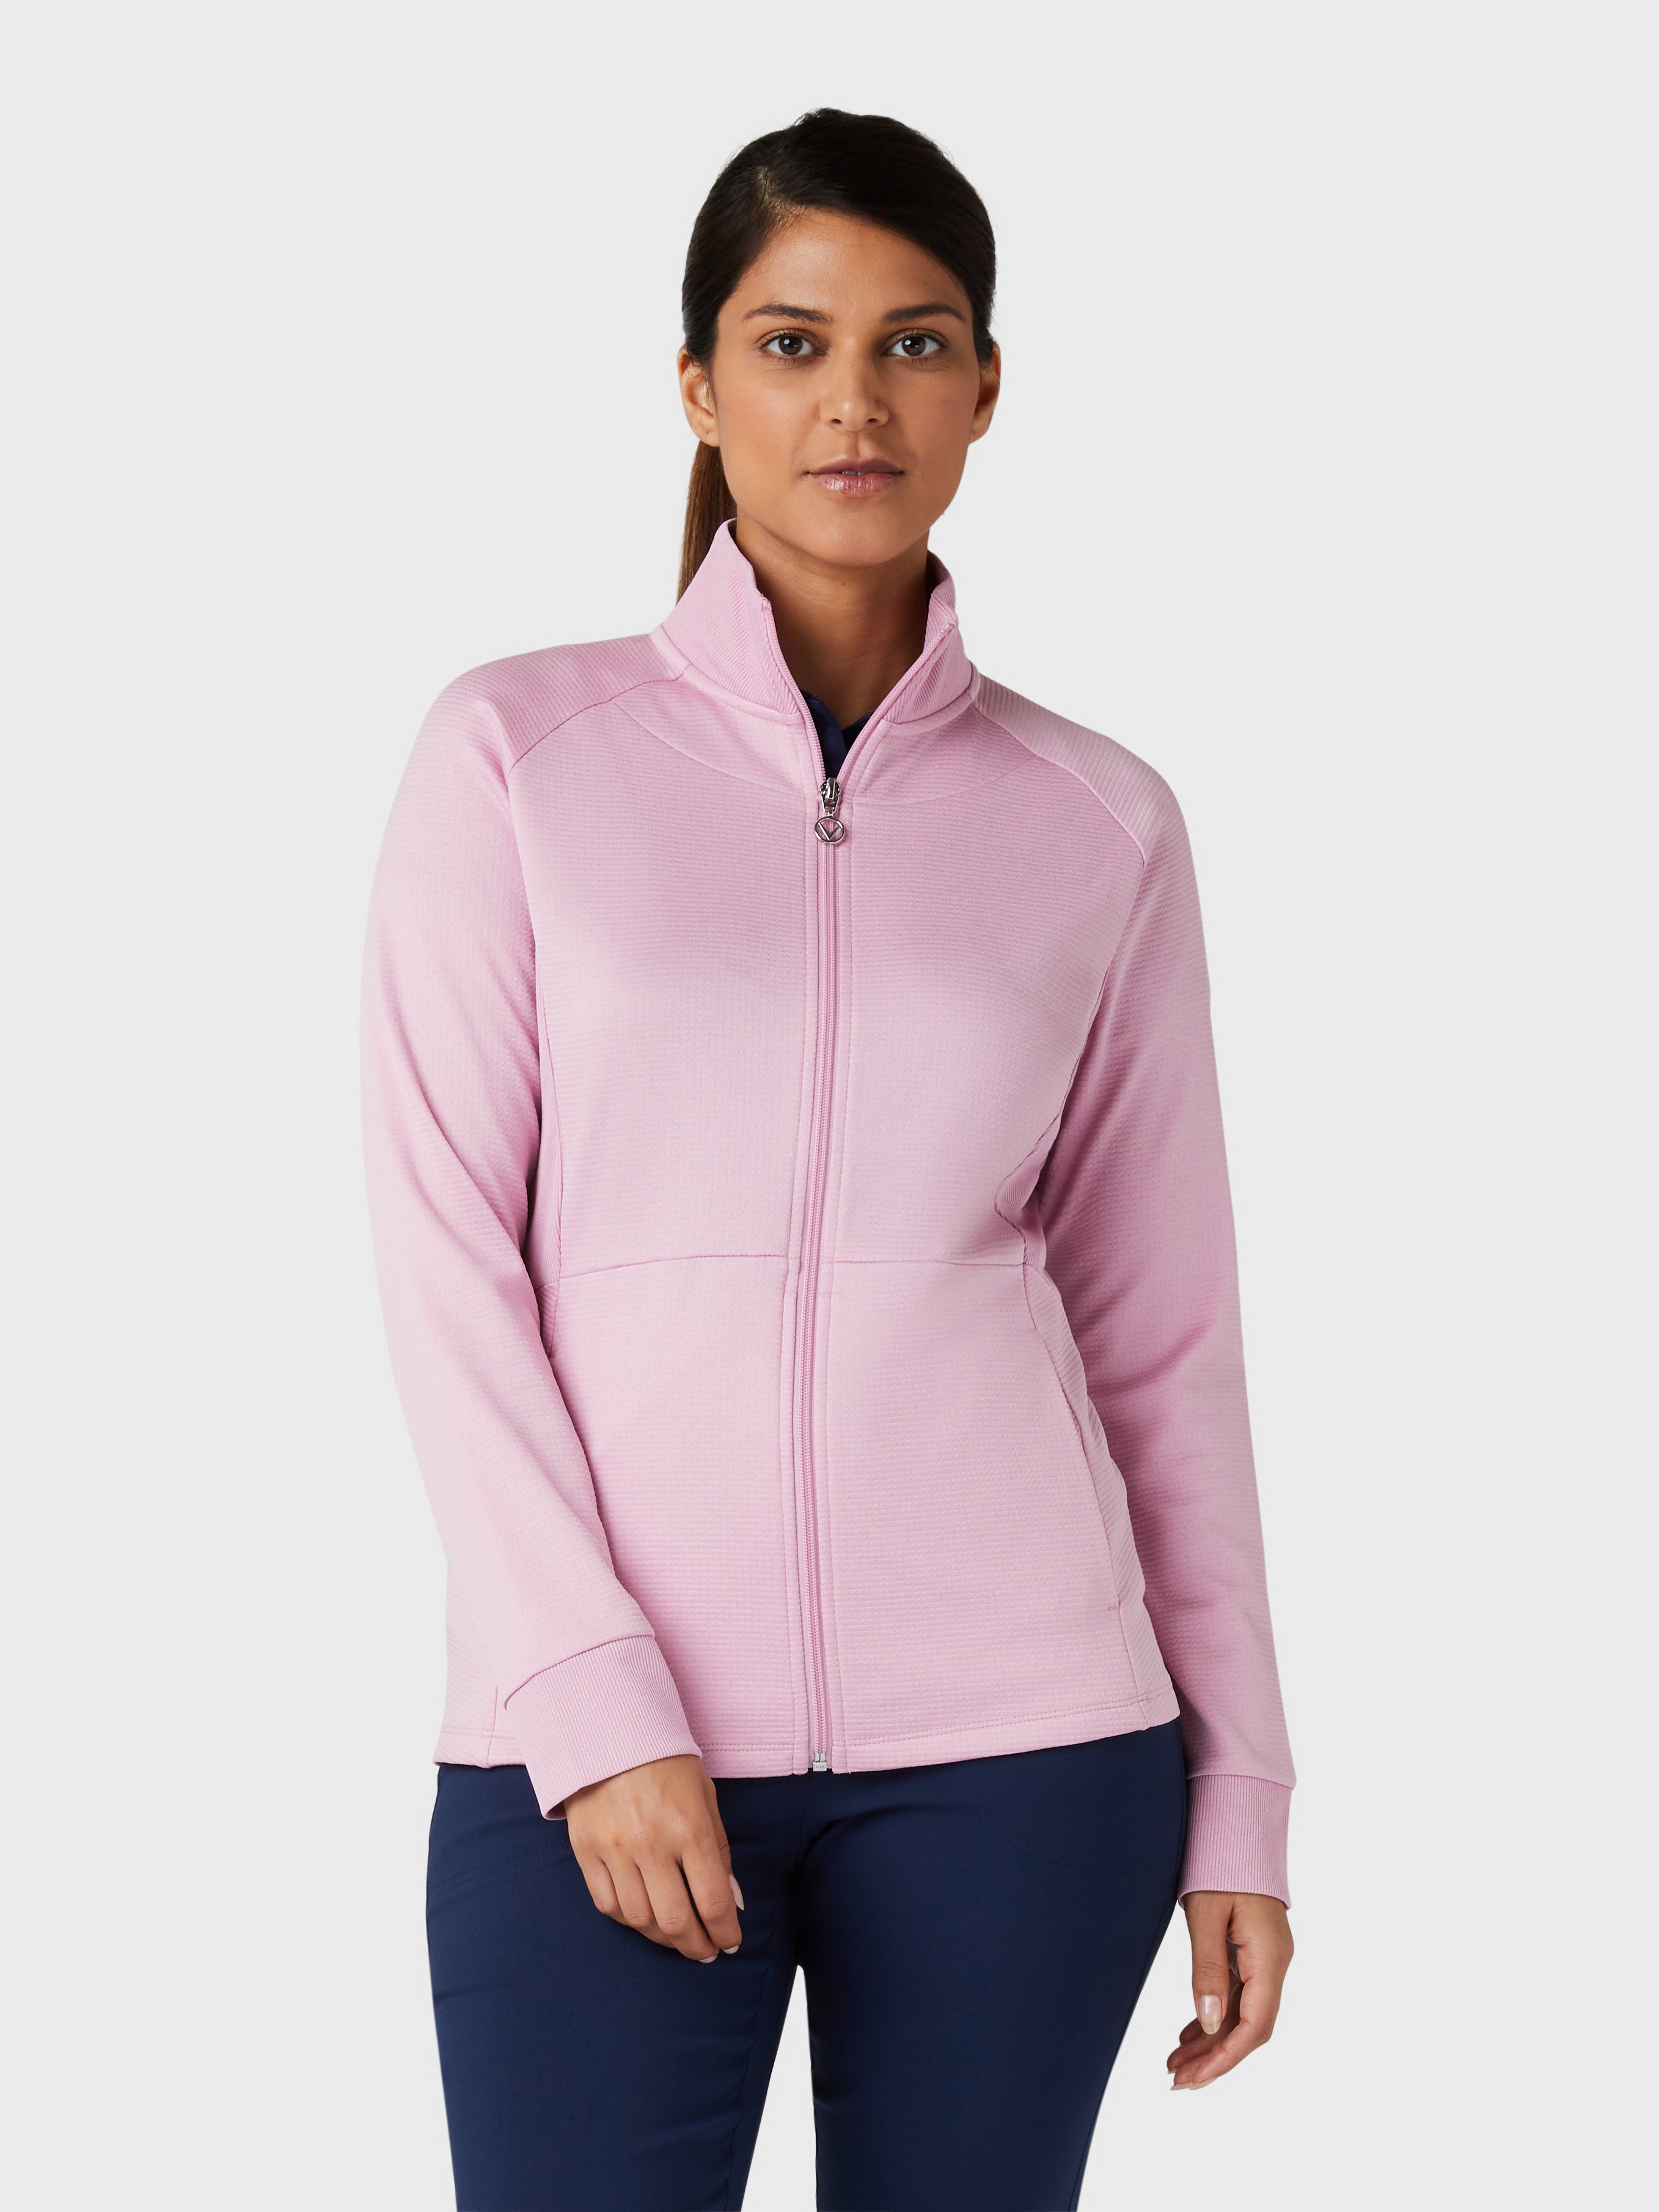 View Midweight Waffle Fleece Womens Jacket In Pink Nectar Heather Pink Nectar Htr XXL information